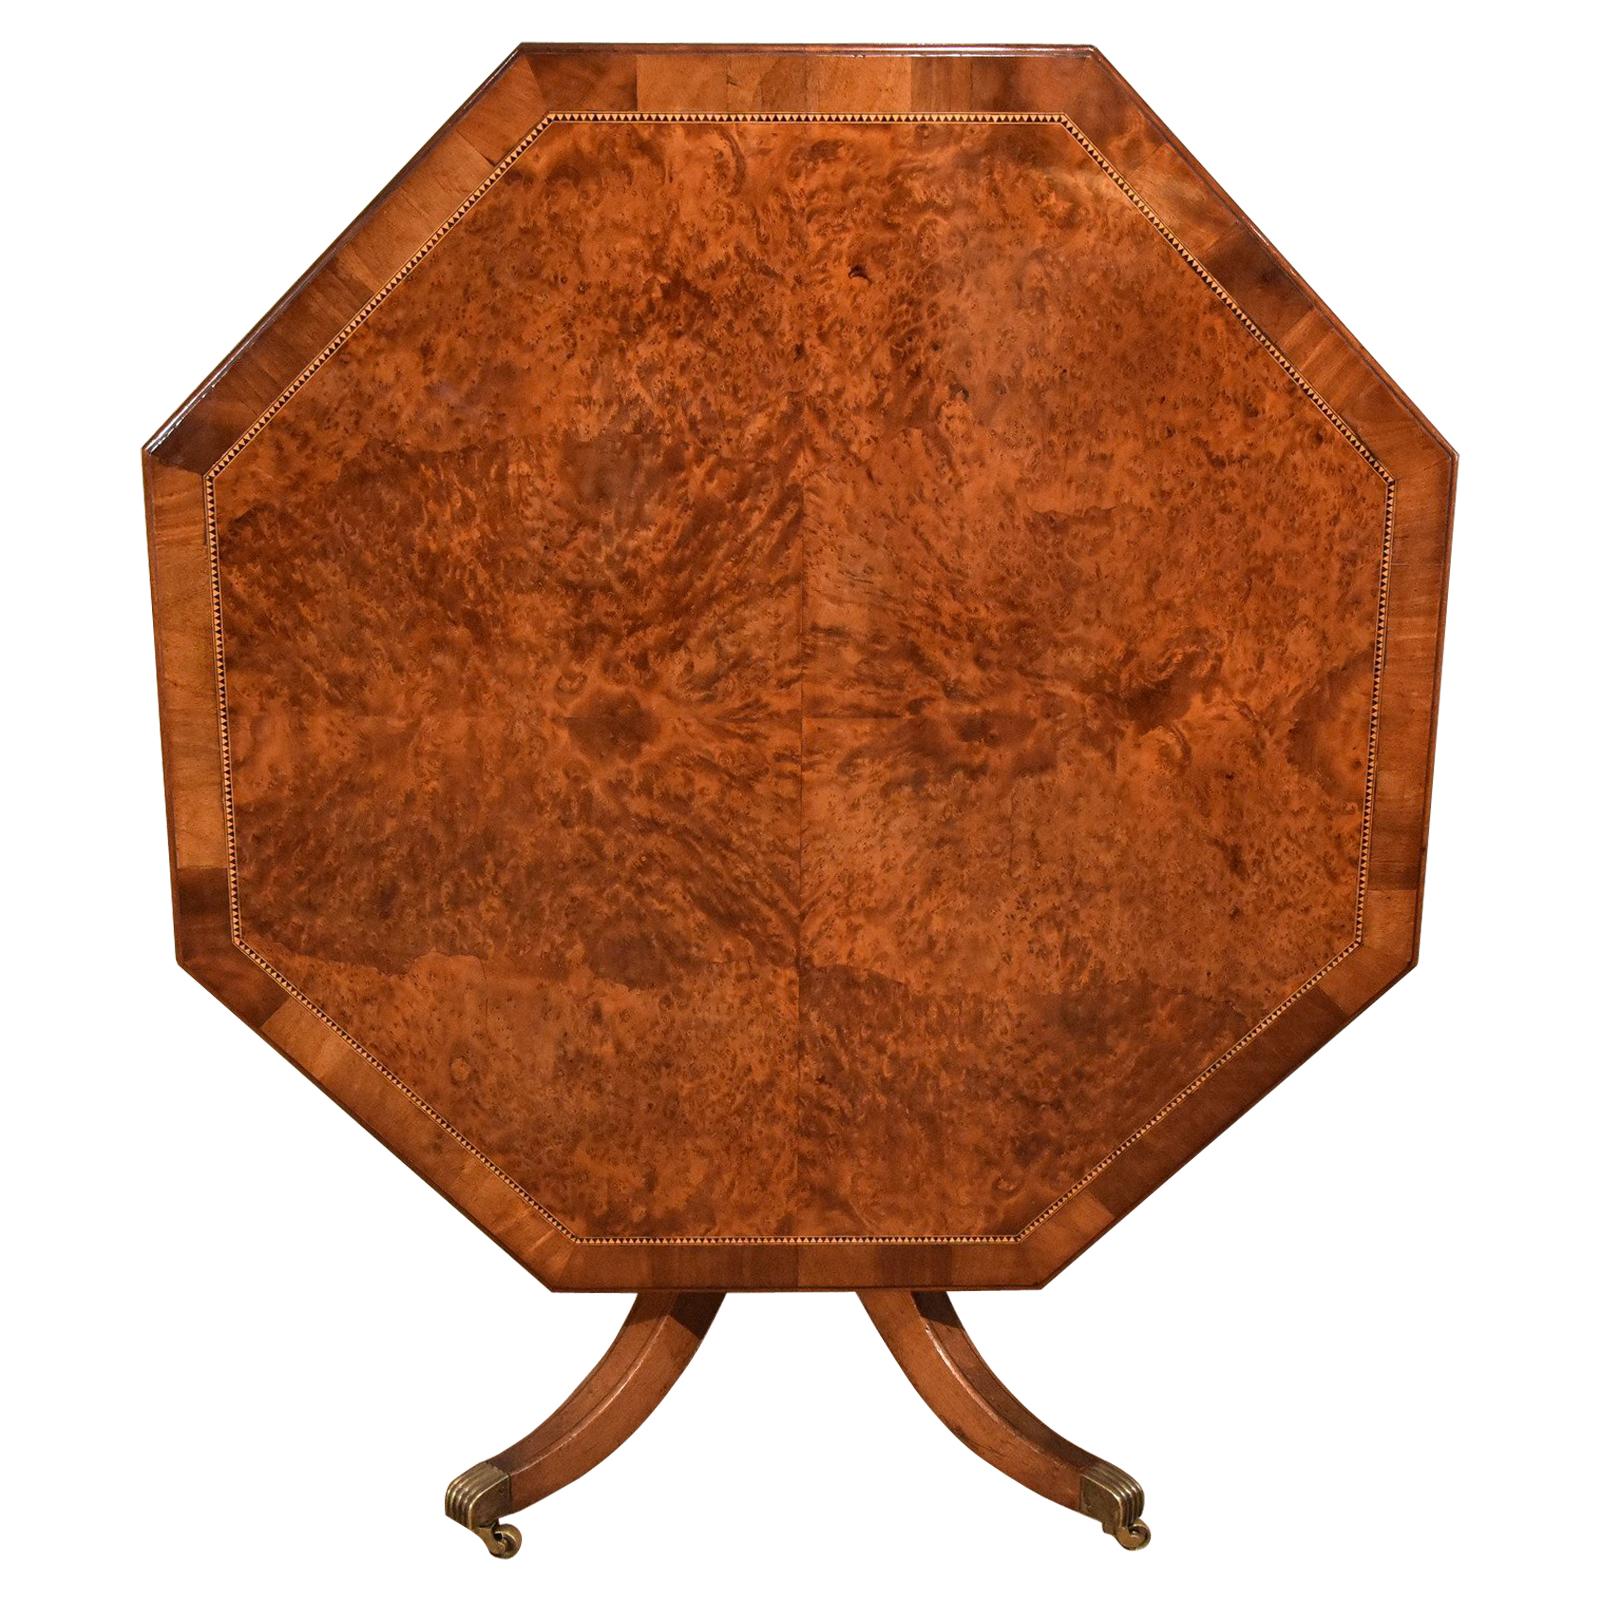 Yew Wood Hexagonal Table Inlaid Stamped Gillows